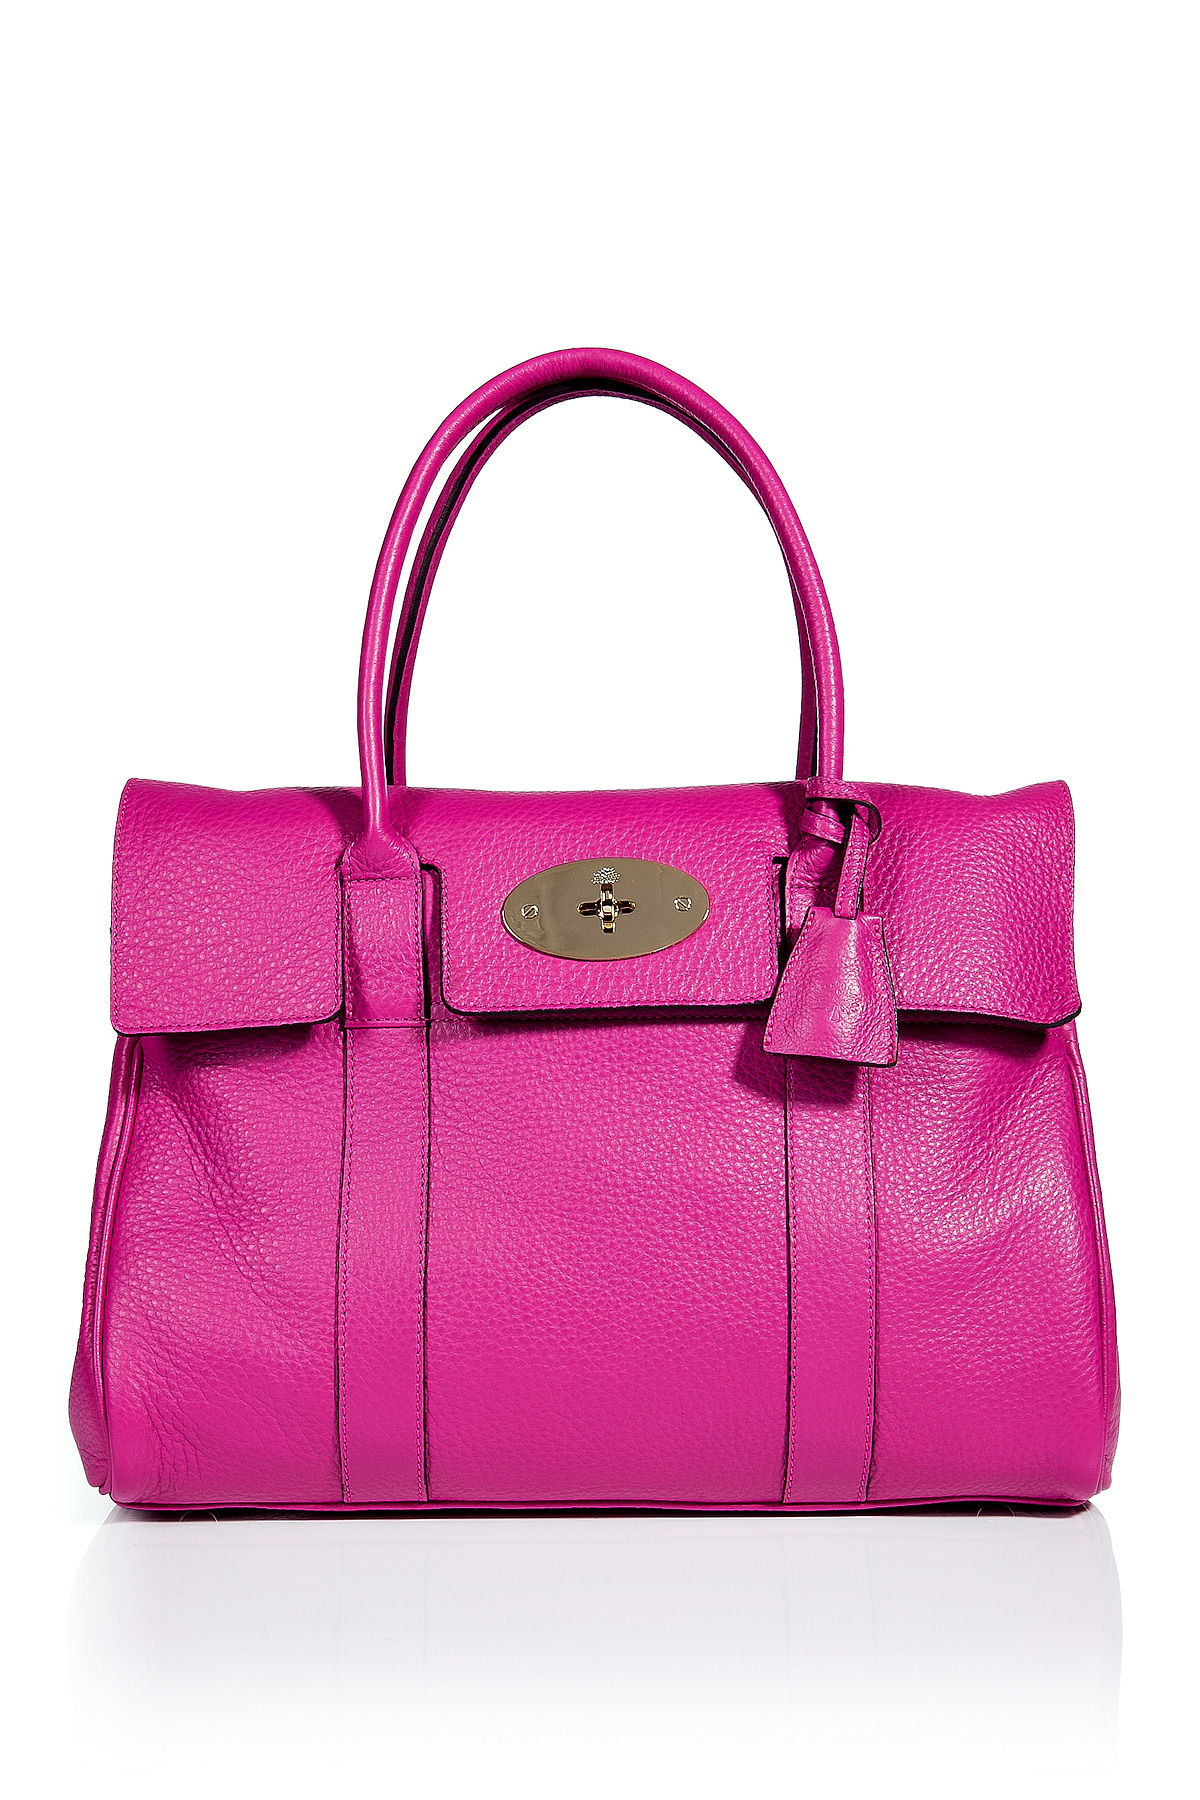 Lyst - Mulberry Hot Fuchsia Bayswater Bag in Pink